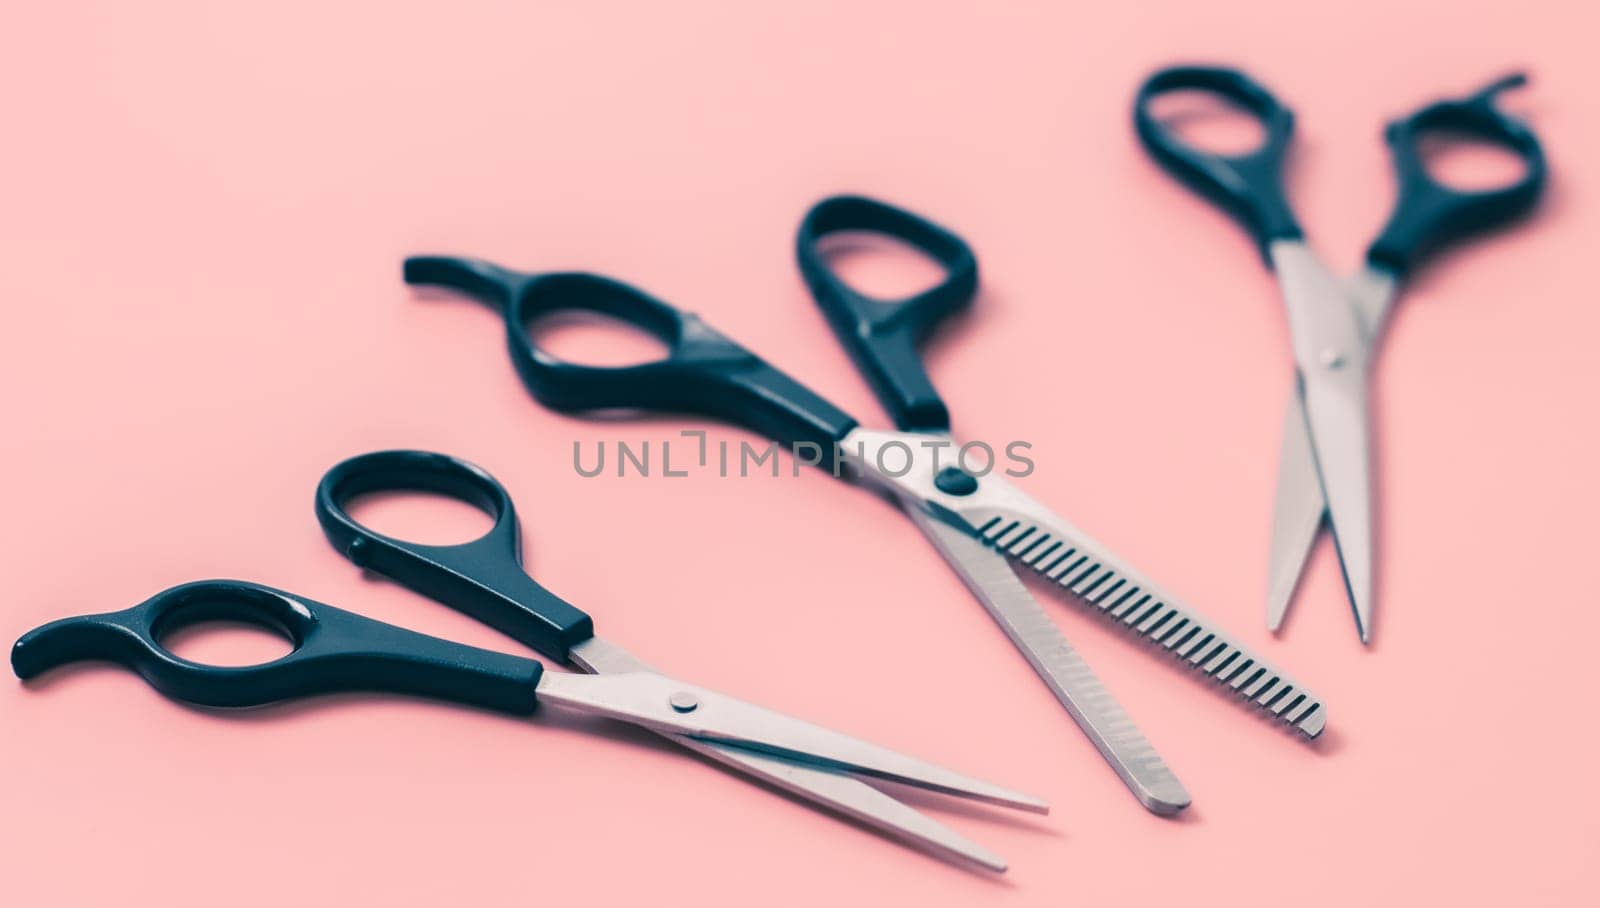 Set of three pairs of hairdresser's scissors on a pink background,close-up side view with depth of field. The concept of hairdressing, beauty salon, tools.